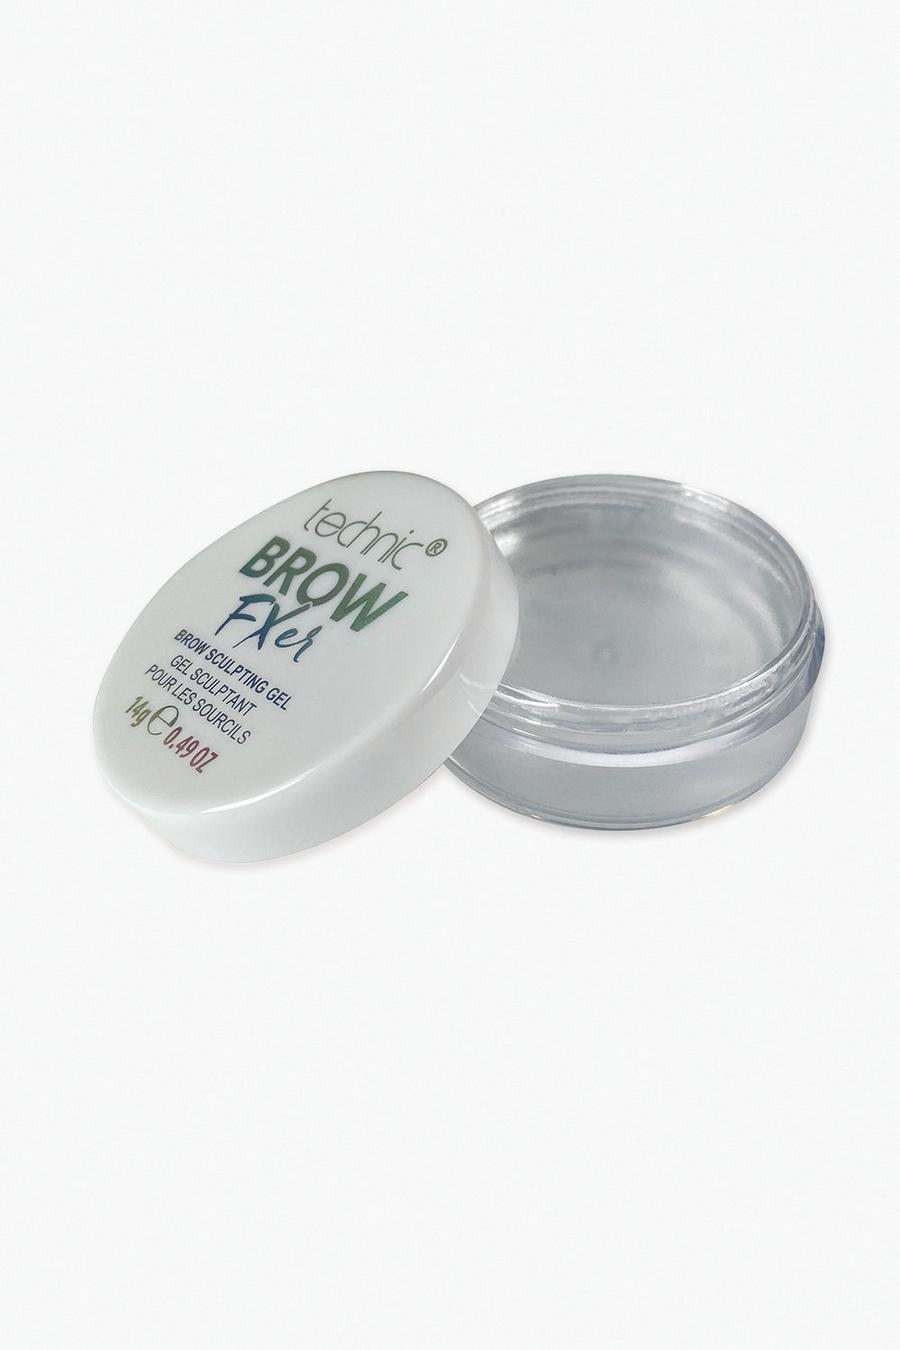 Clear transparent Technic Brow Fxer